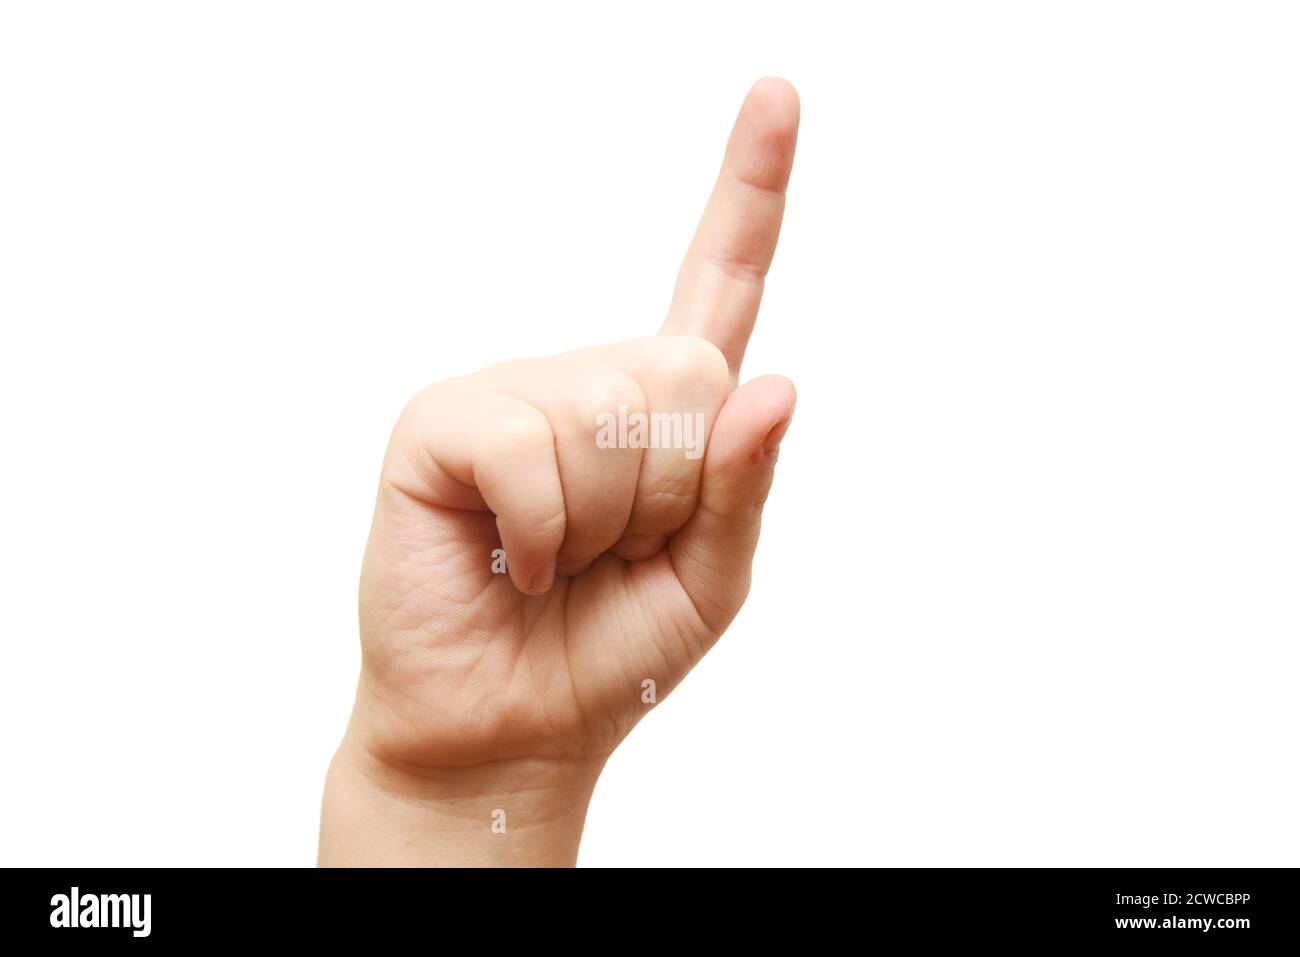 The child points with his finger. Finger points close up on white background. Stock Photo